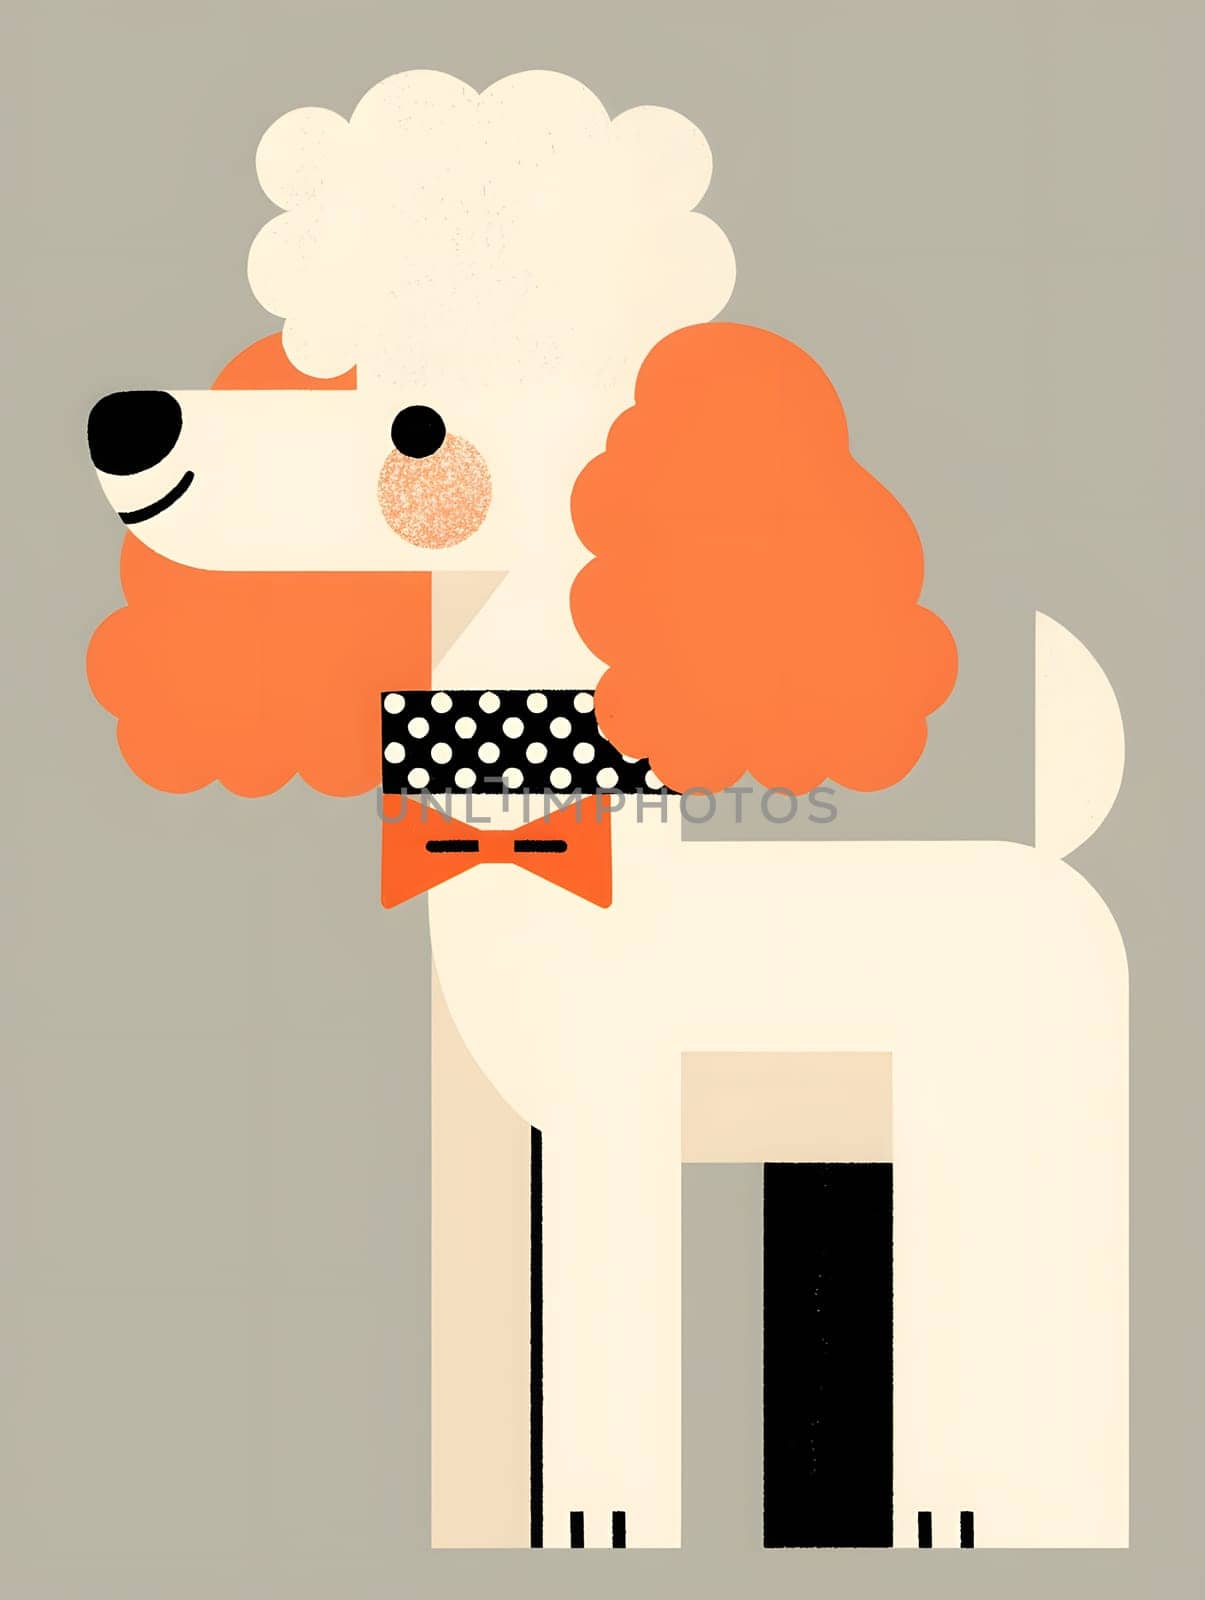 an illustration of a poodle wearing a bow tie by Nadtochiy